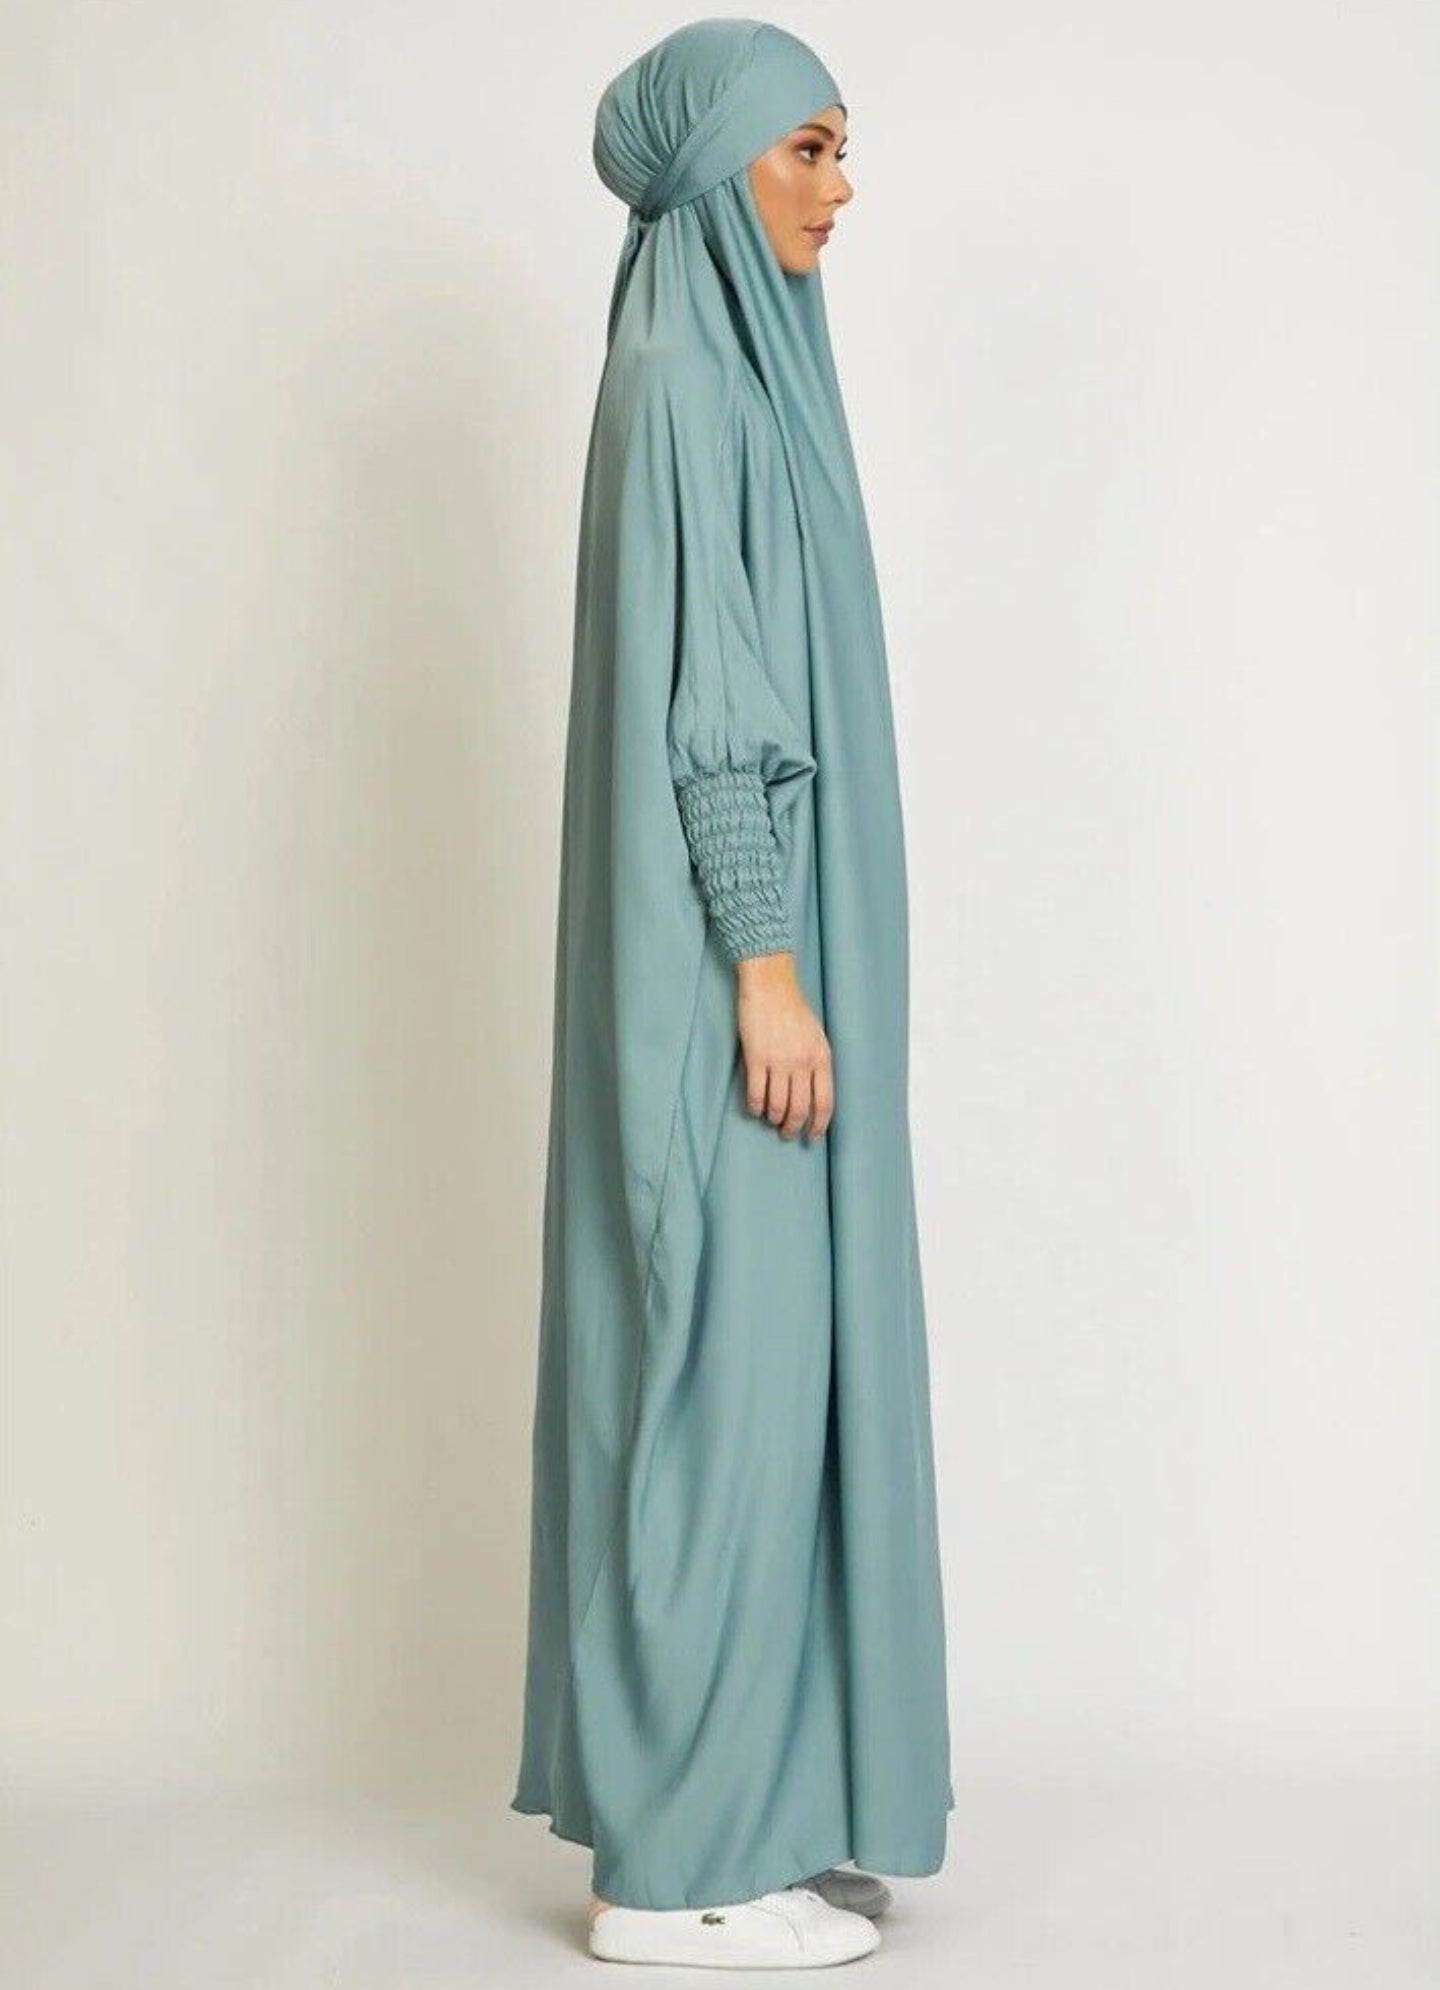 Dive into serenity with our Aqua Pearl One Piece Tie-Up Jilbab. Immerse yourself in the tranquil hues of aqua, combining modesty and style. Explore our exclusive satin Jilbab at Hikmah Boutique for unique and affordable prayer Jilbab.